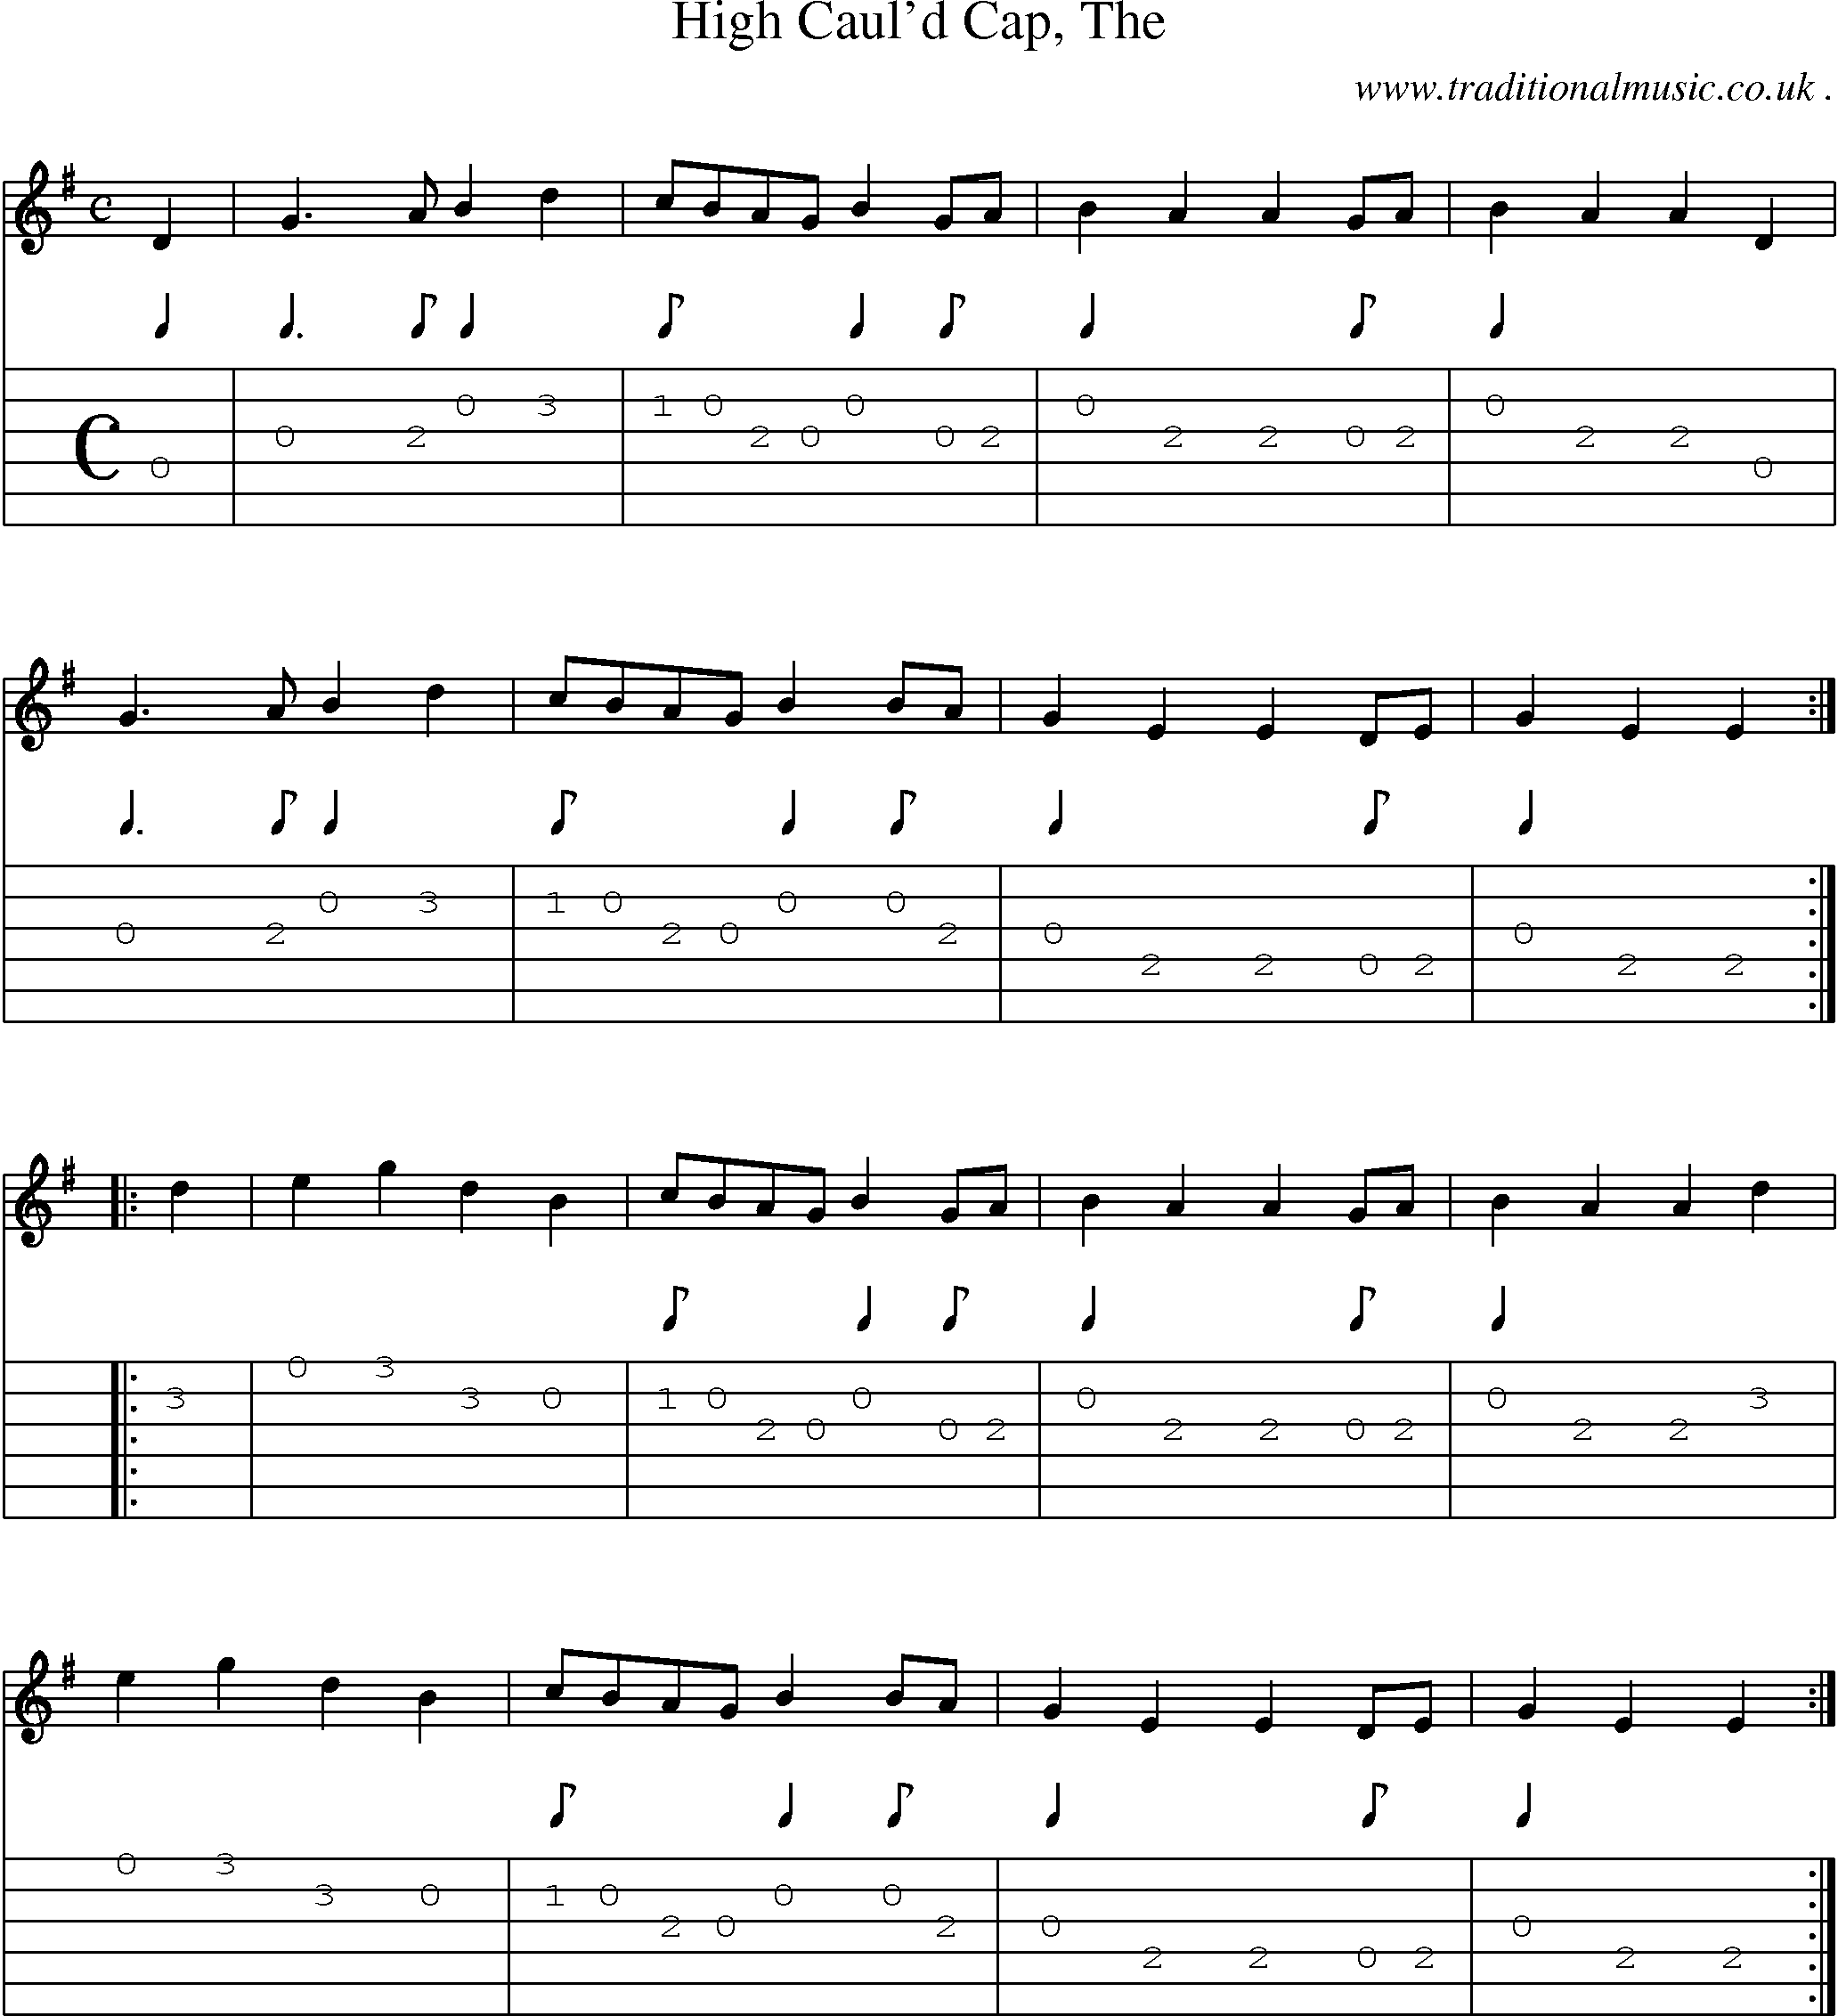 Sheet-music  score, Chords and Guitar Tabs for High Cauld Cap The